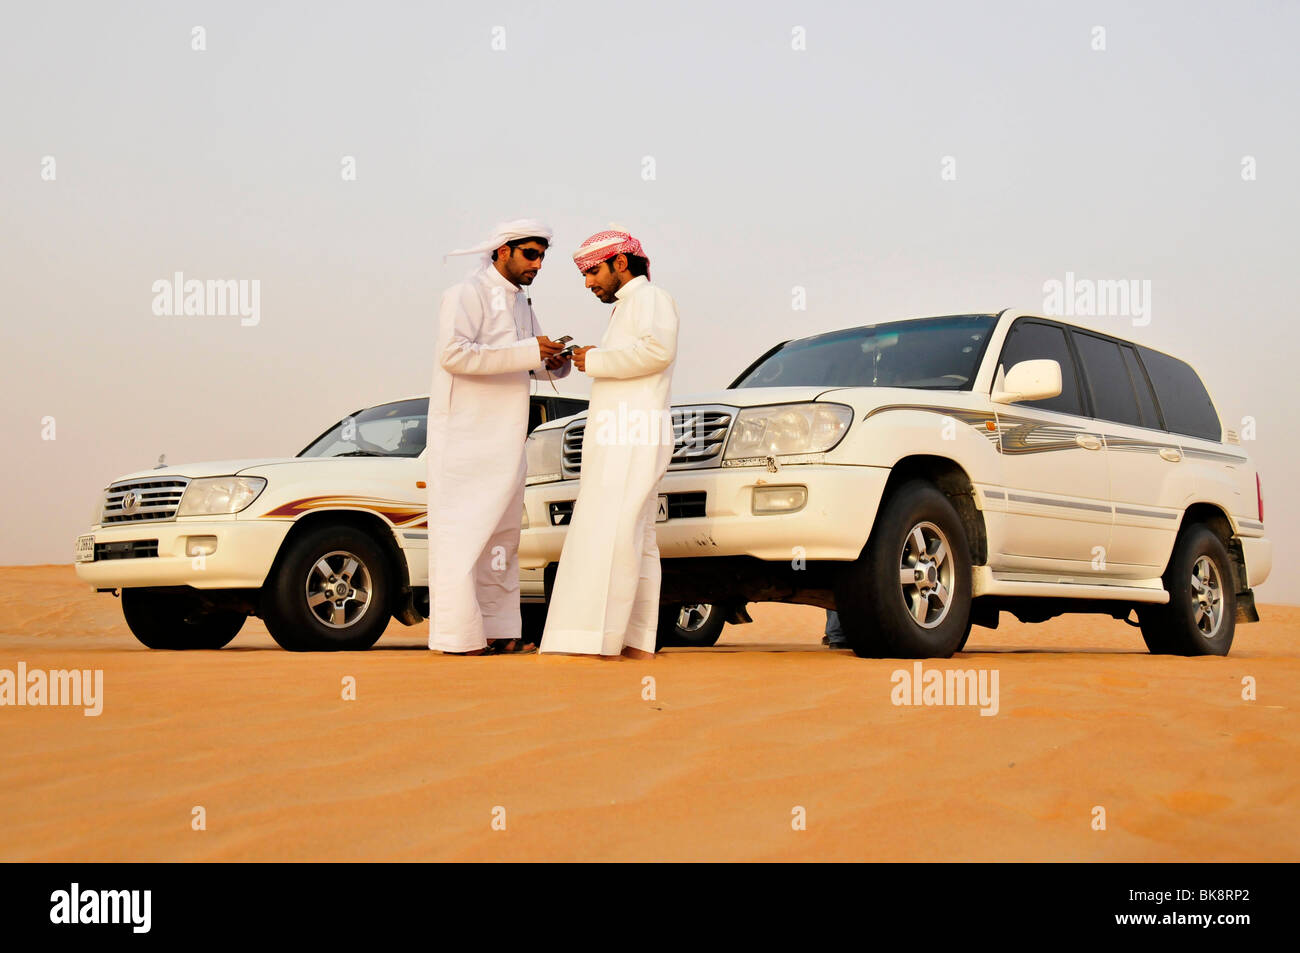 Two Arabs in Dishdashas, the typical white cloaks, with jeeps and mobile phones in the desert, Liwa Oasis, Abu Dhabi, United Ar Stock Photo